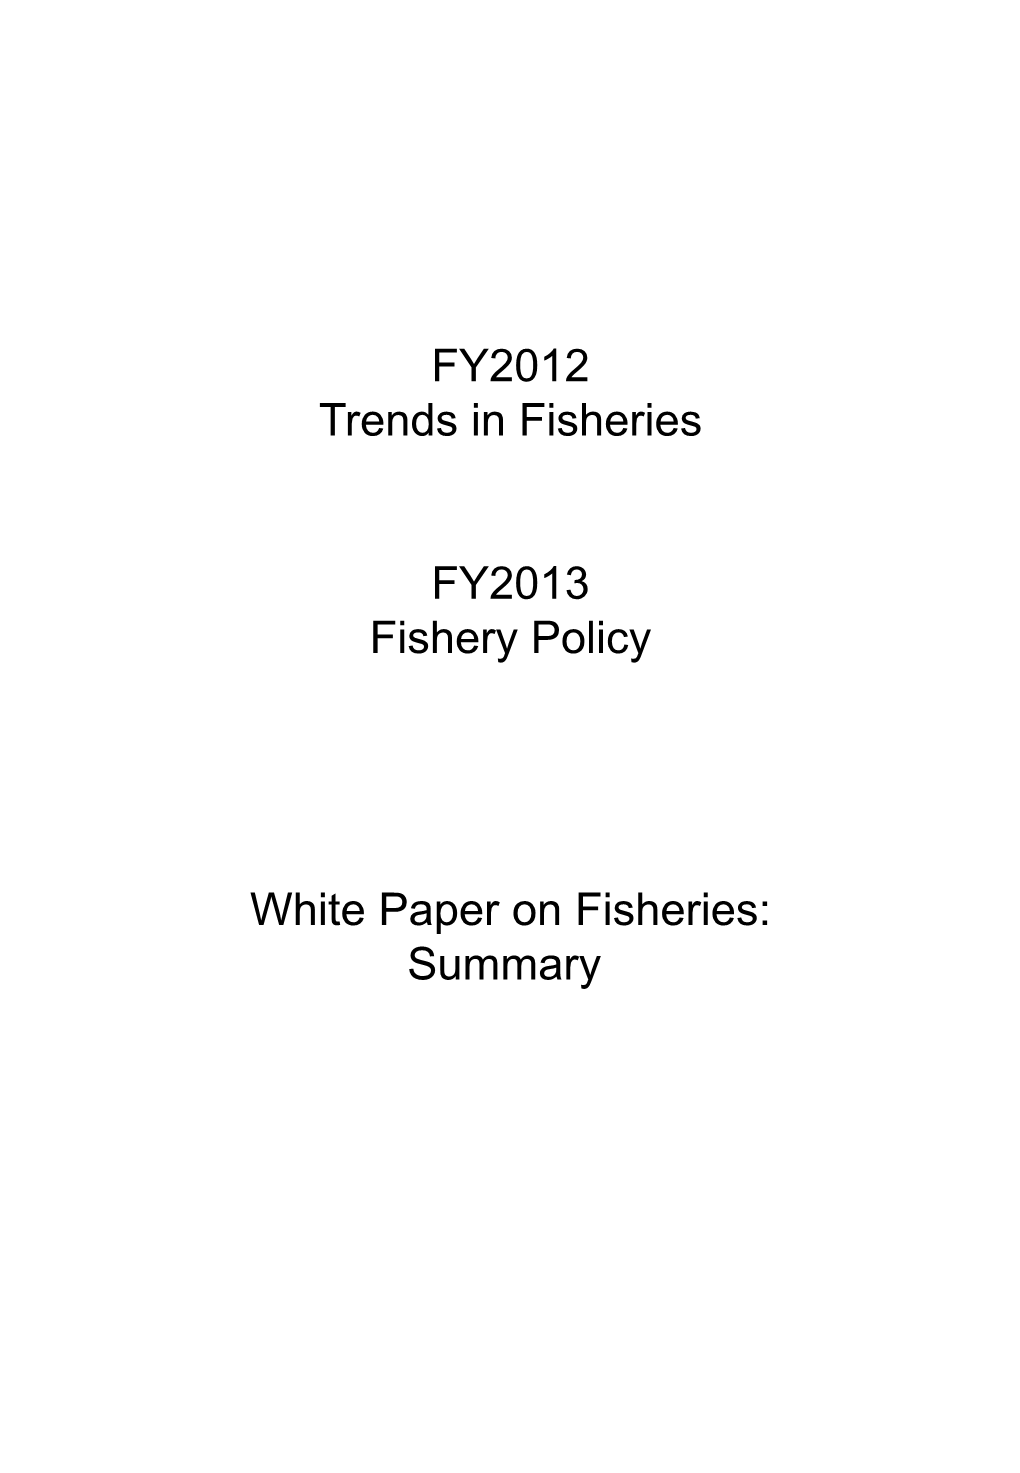 FY2012 Trends in Fisheries FY2013 Fishery Policy White Paper On